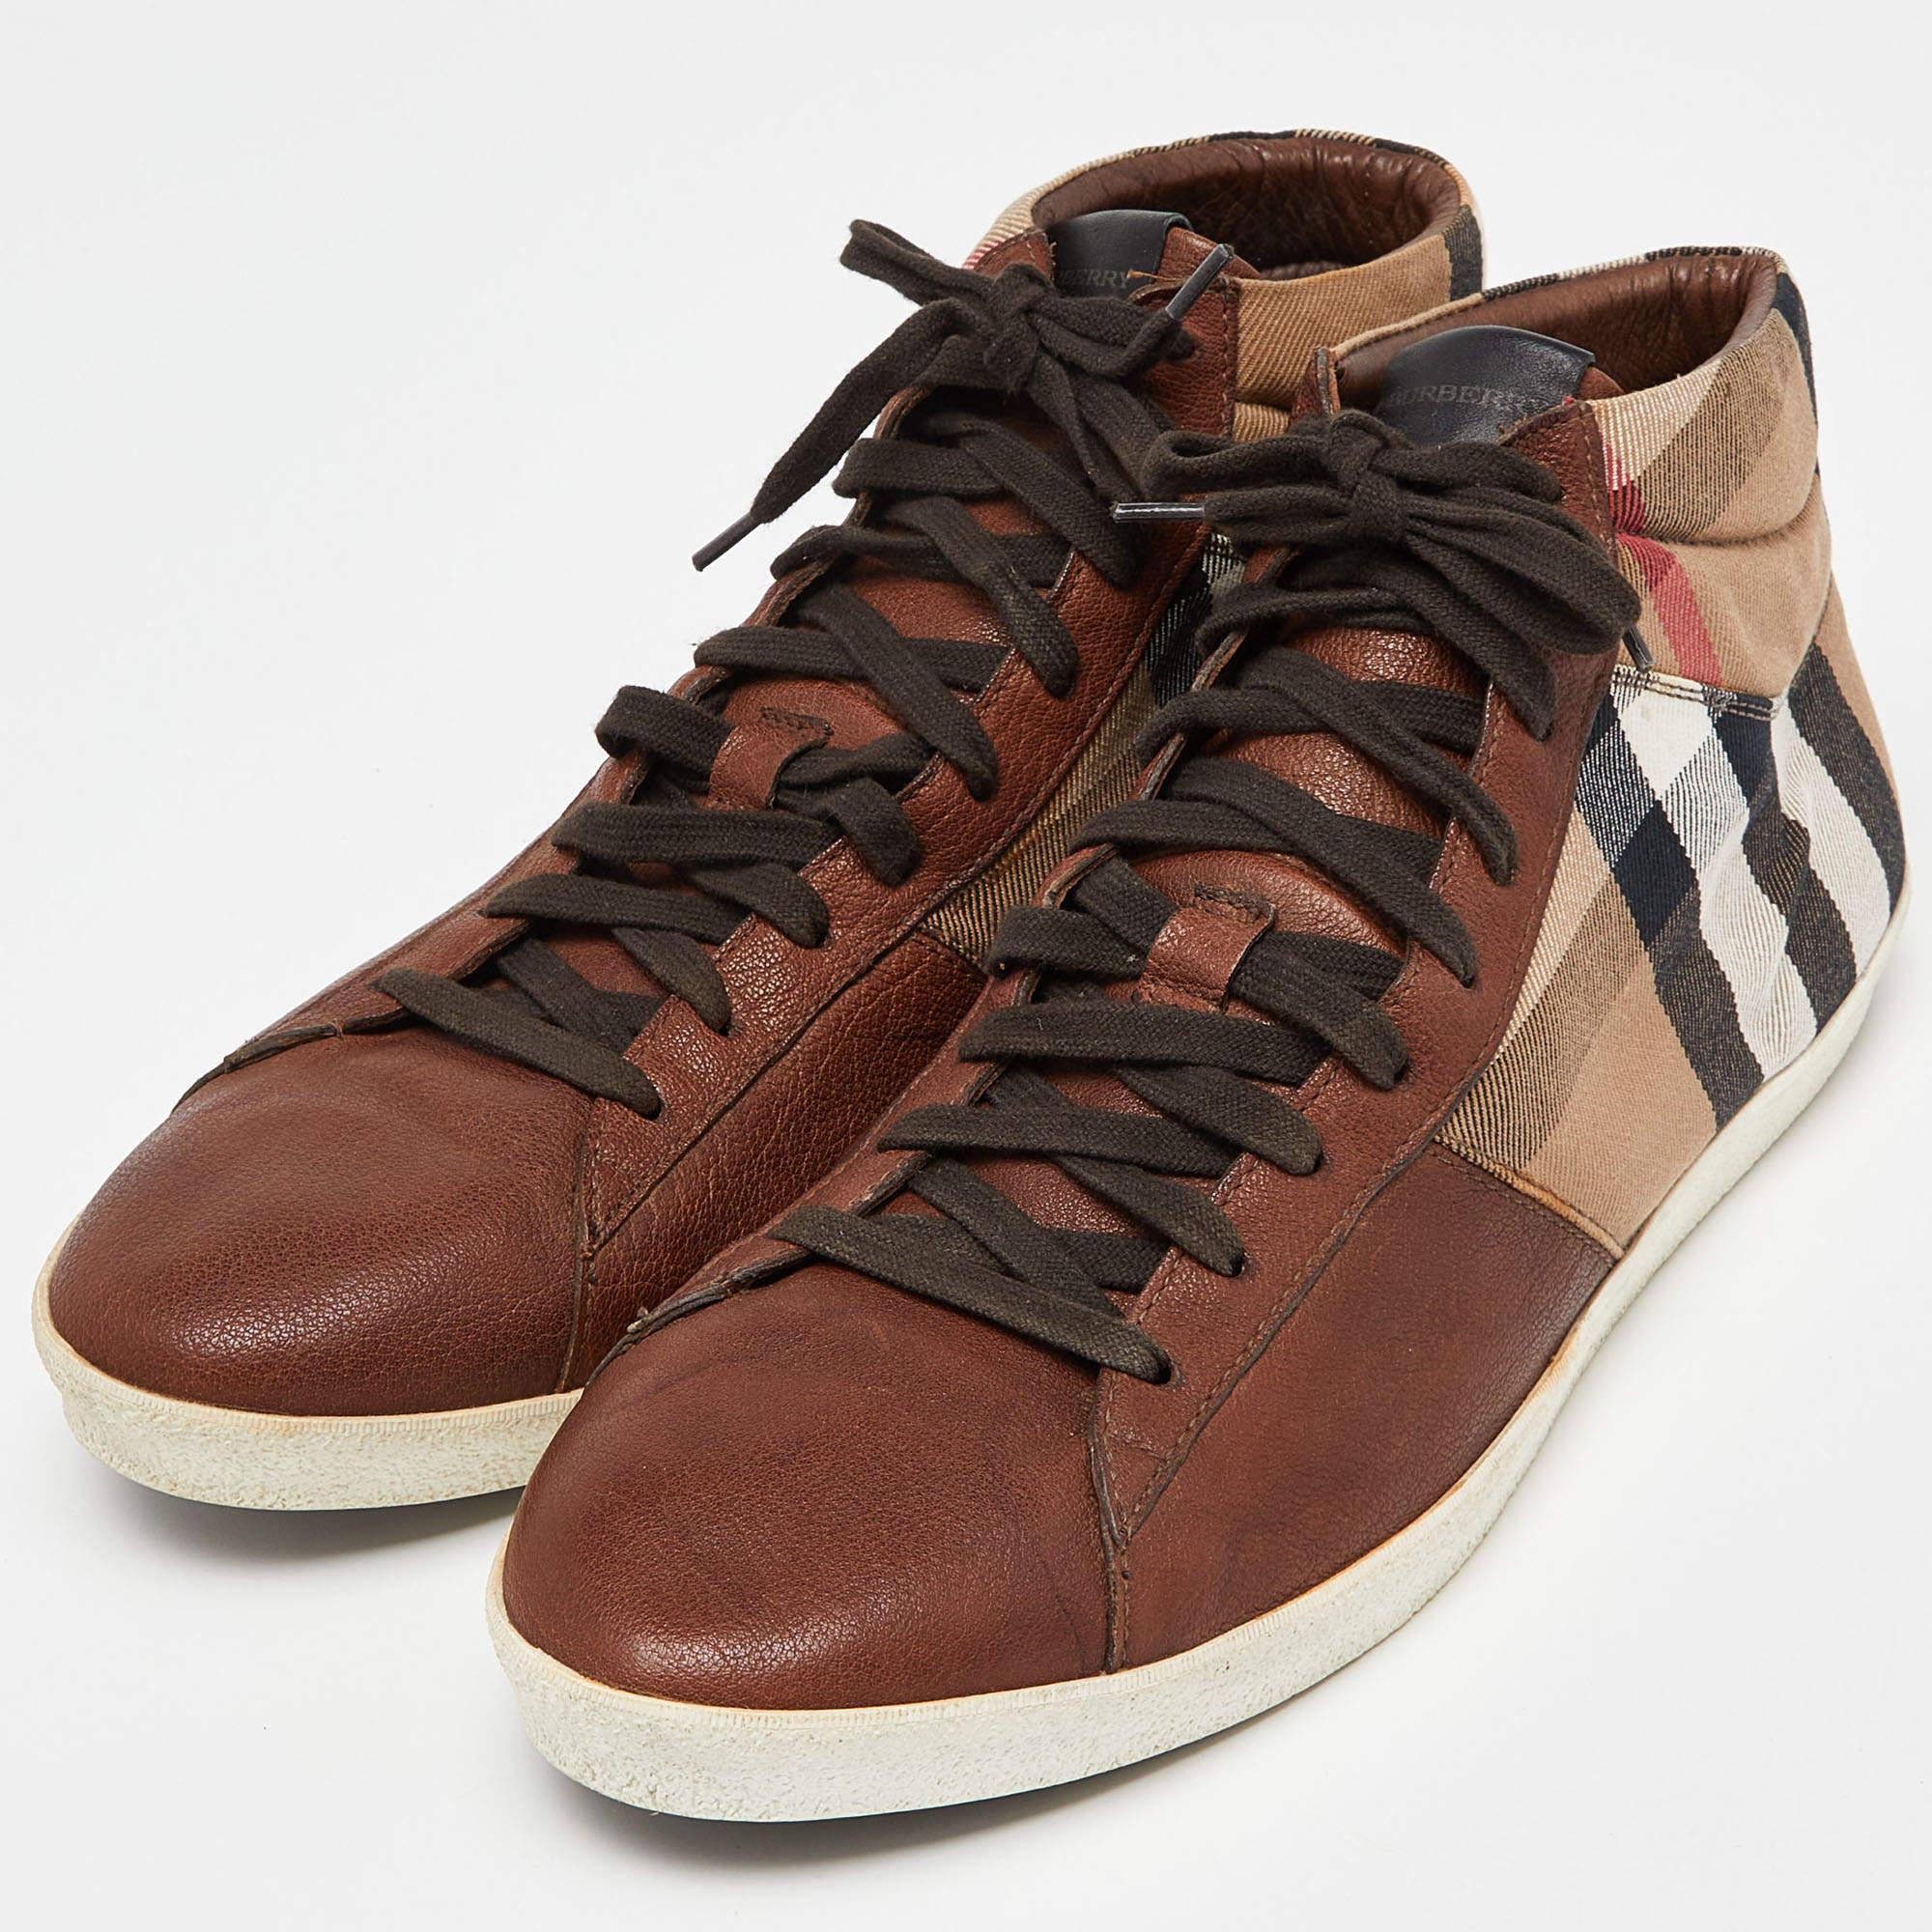 Burberry Brown/Beige Leather And Check Canvas High Top Sneakers Size 45 In Good Condition For Sale In Dubai, Al Qouz 2